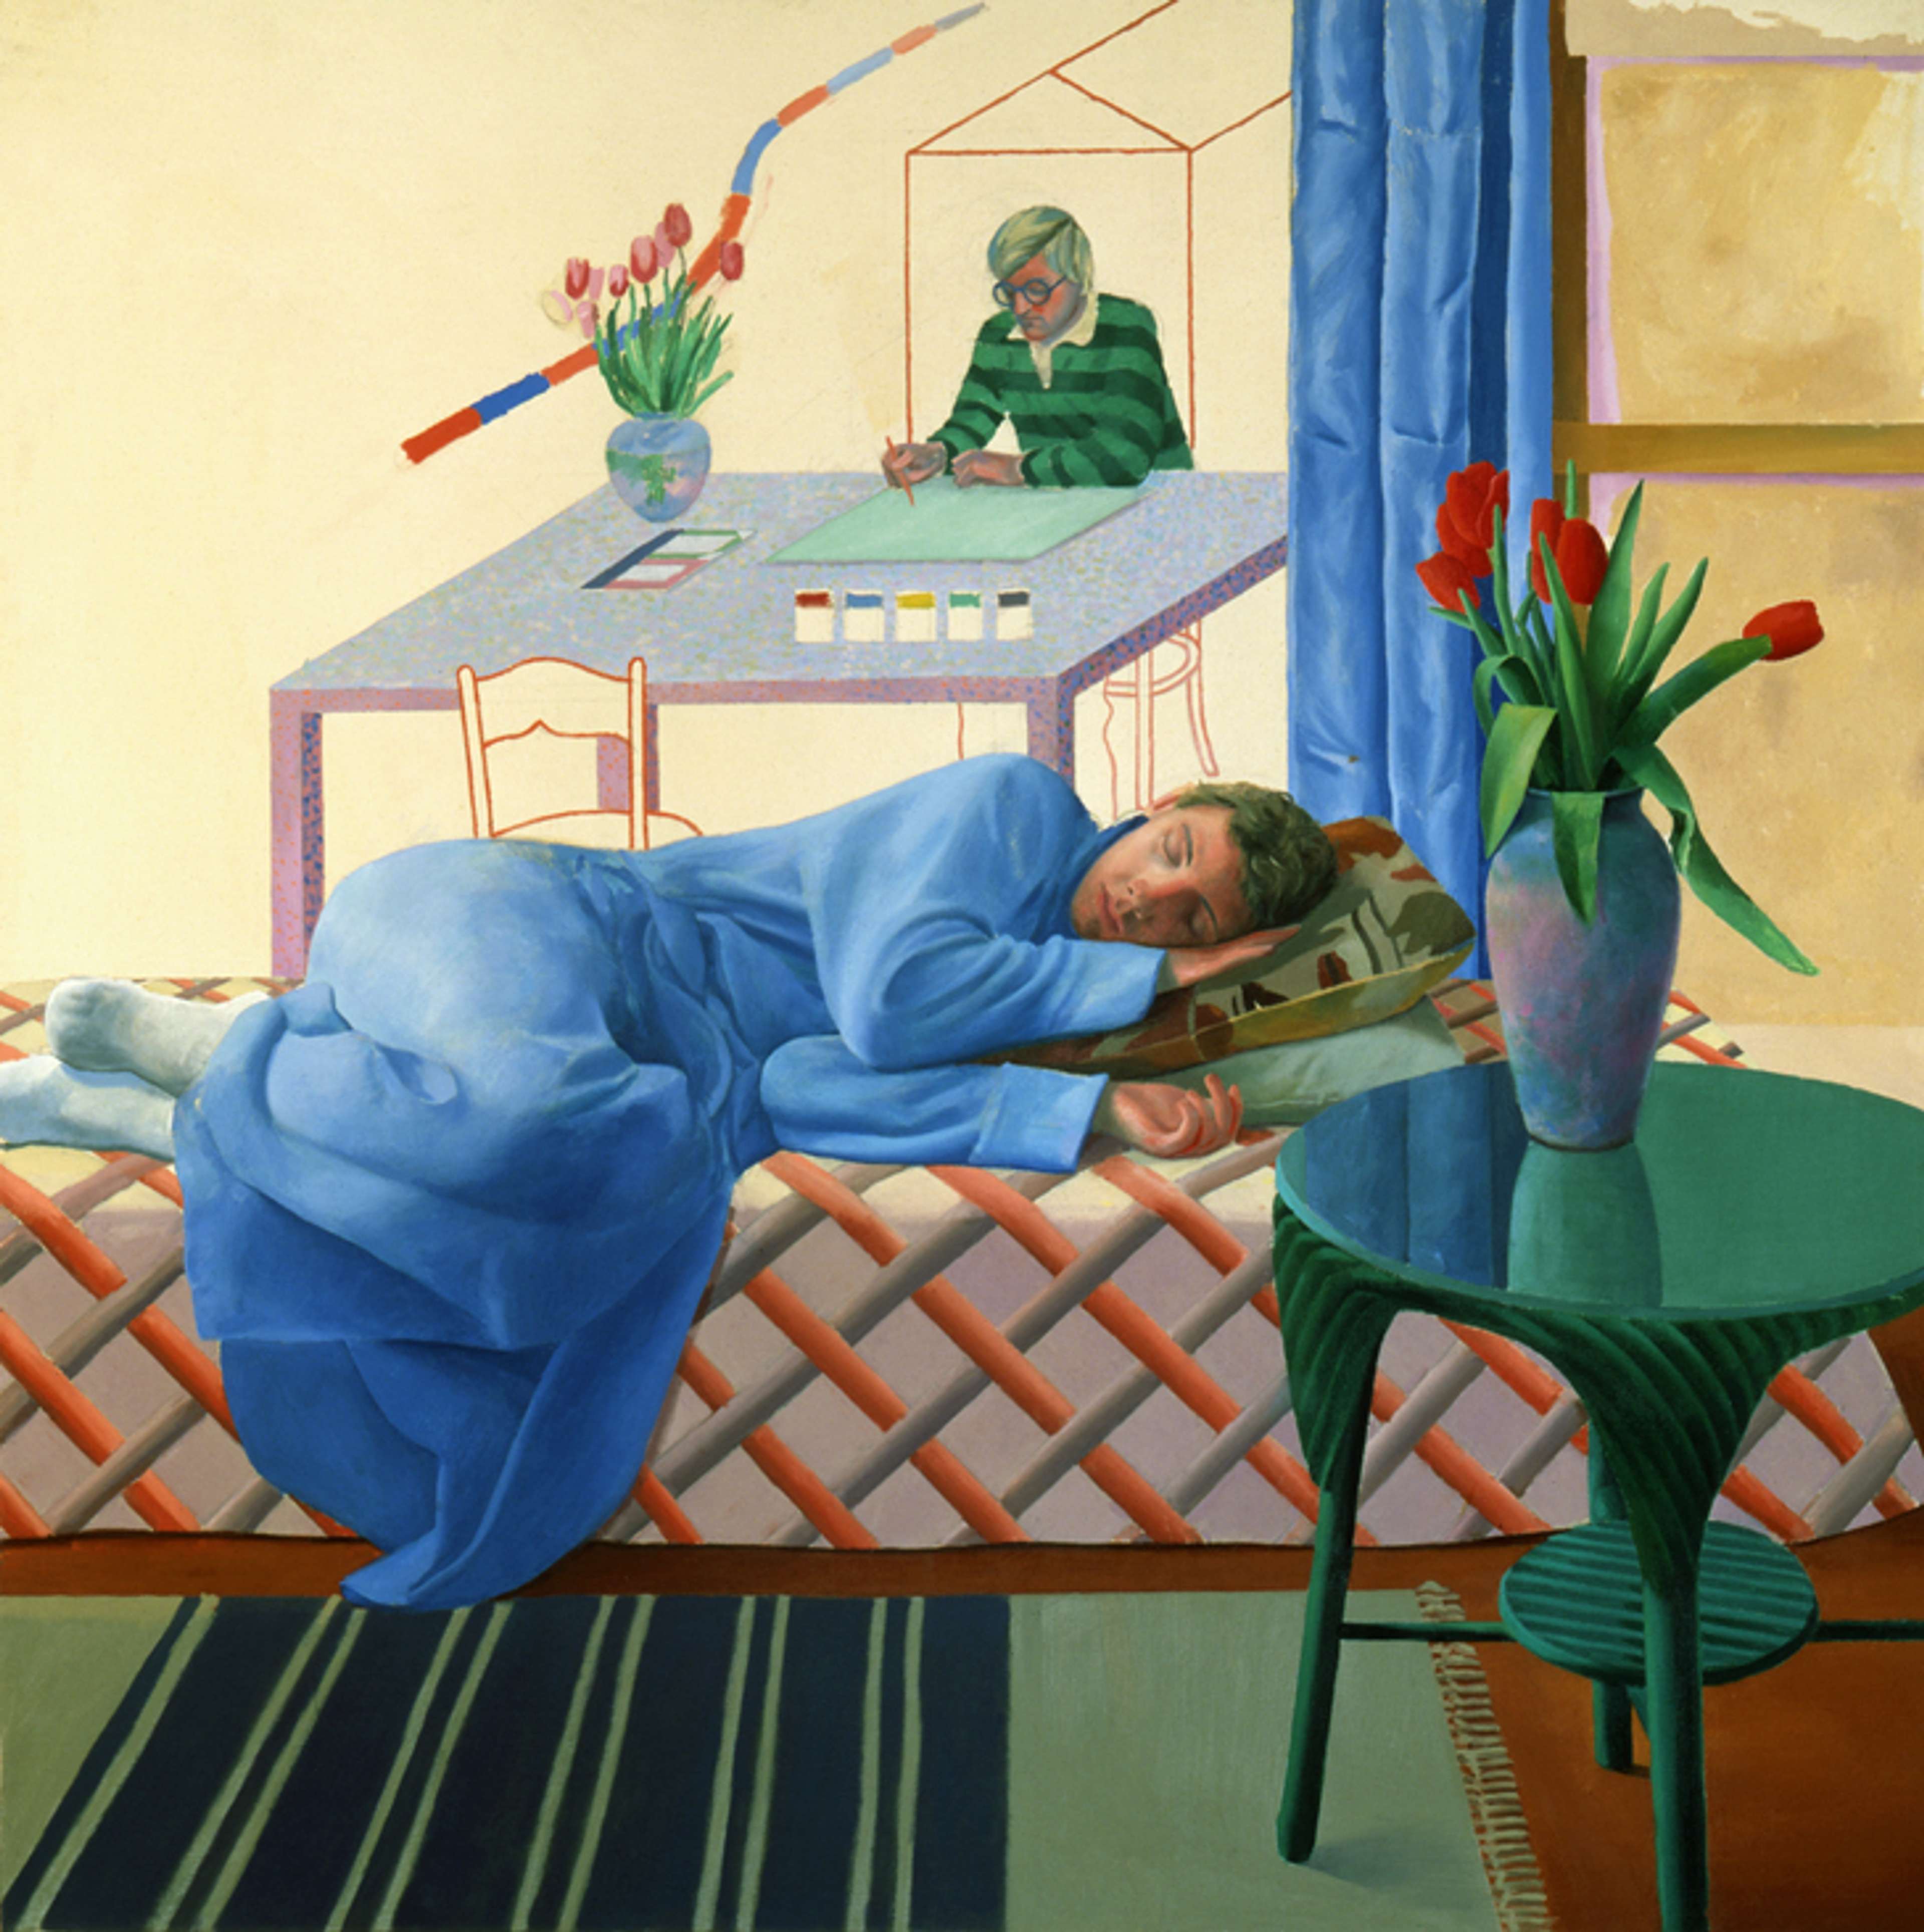 David Hockney’s Model With Unfinished Self-Portrait. An oil on canvas work of a man lying down in bed on his side with David Hockney in the background painting at a desk.